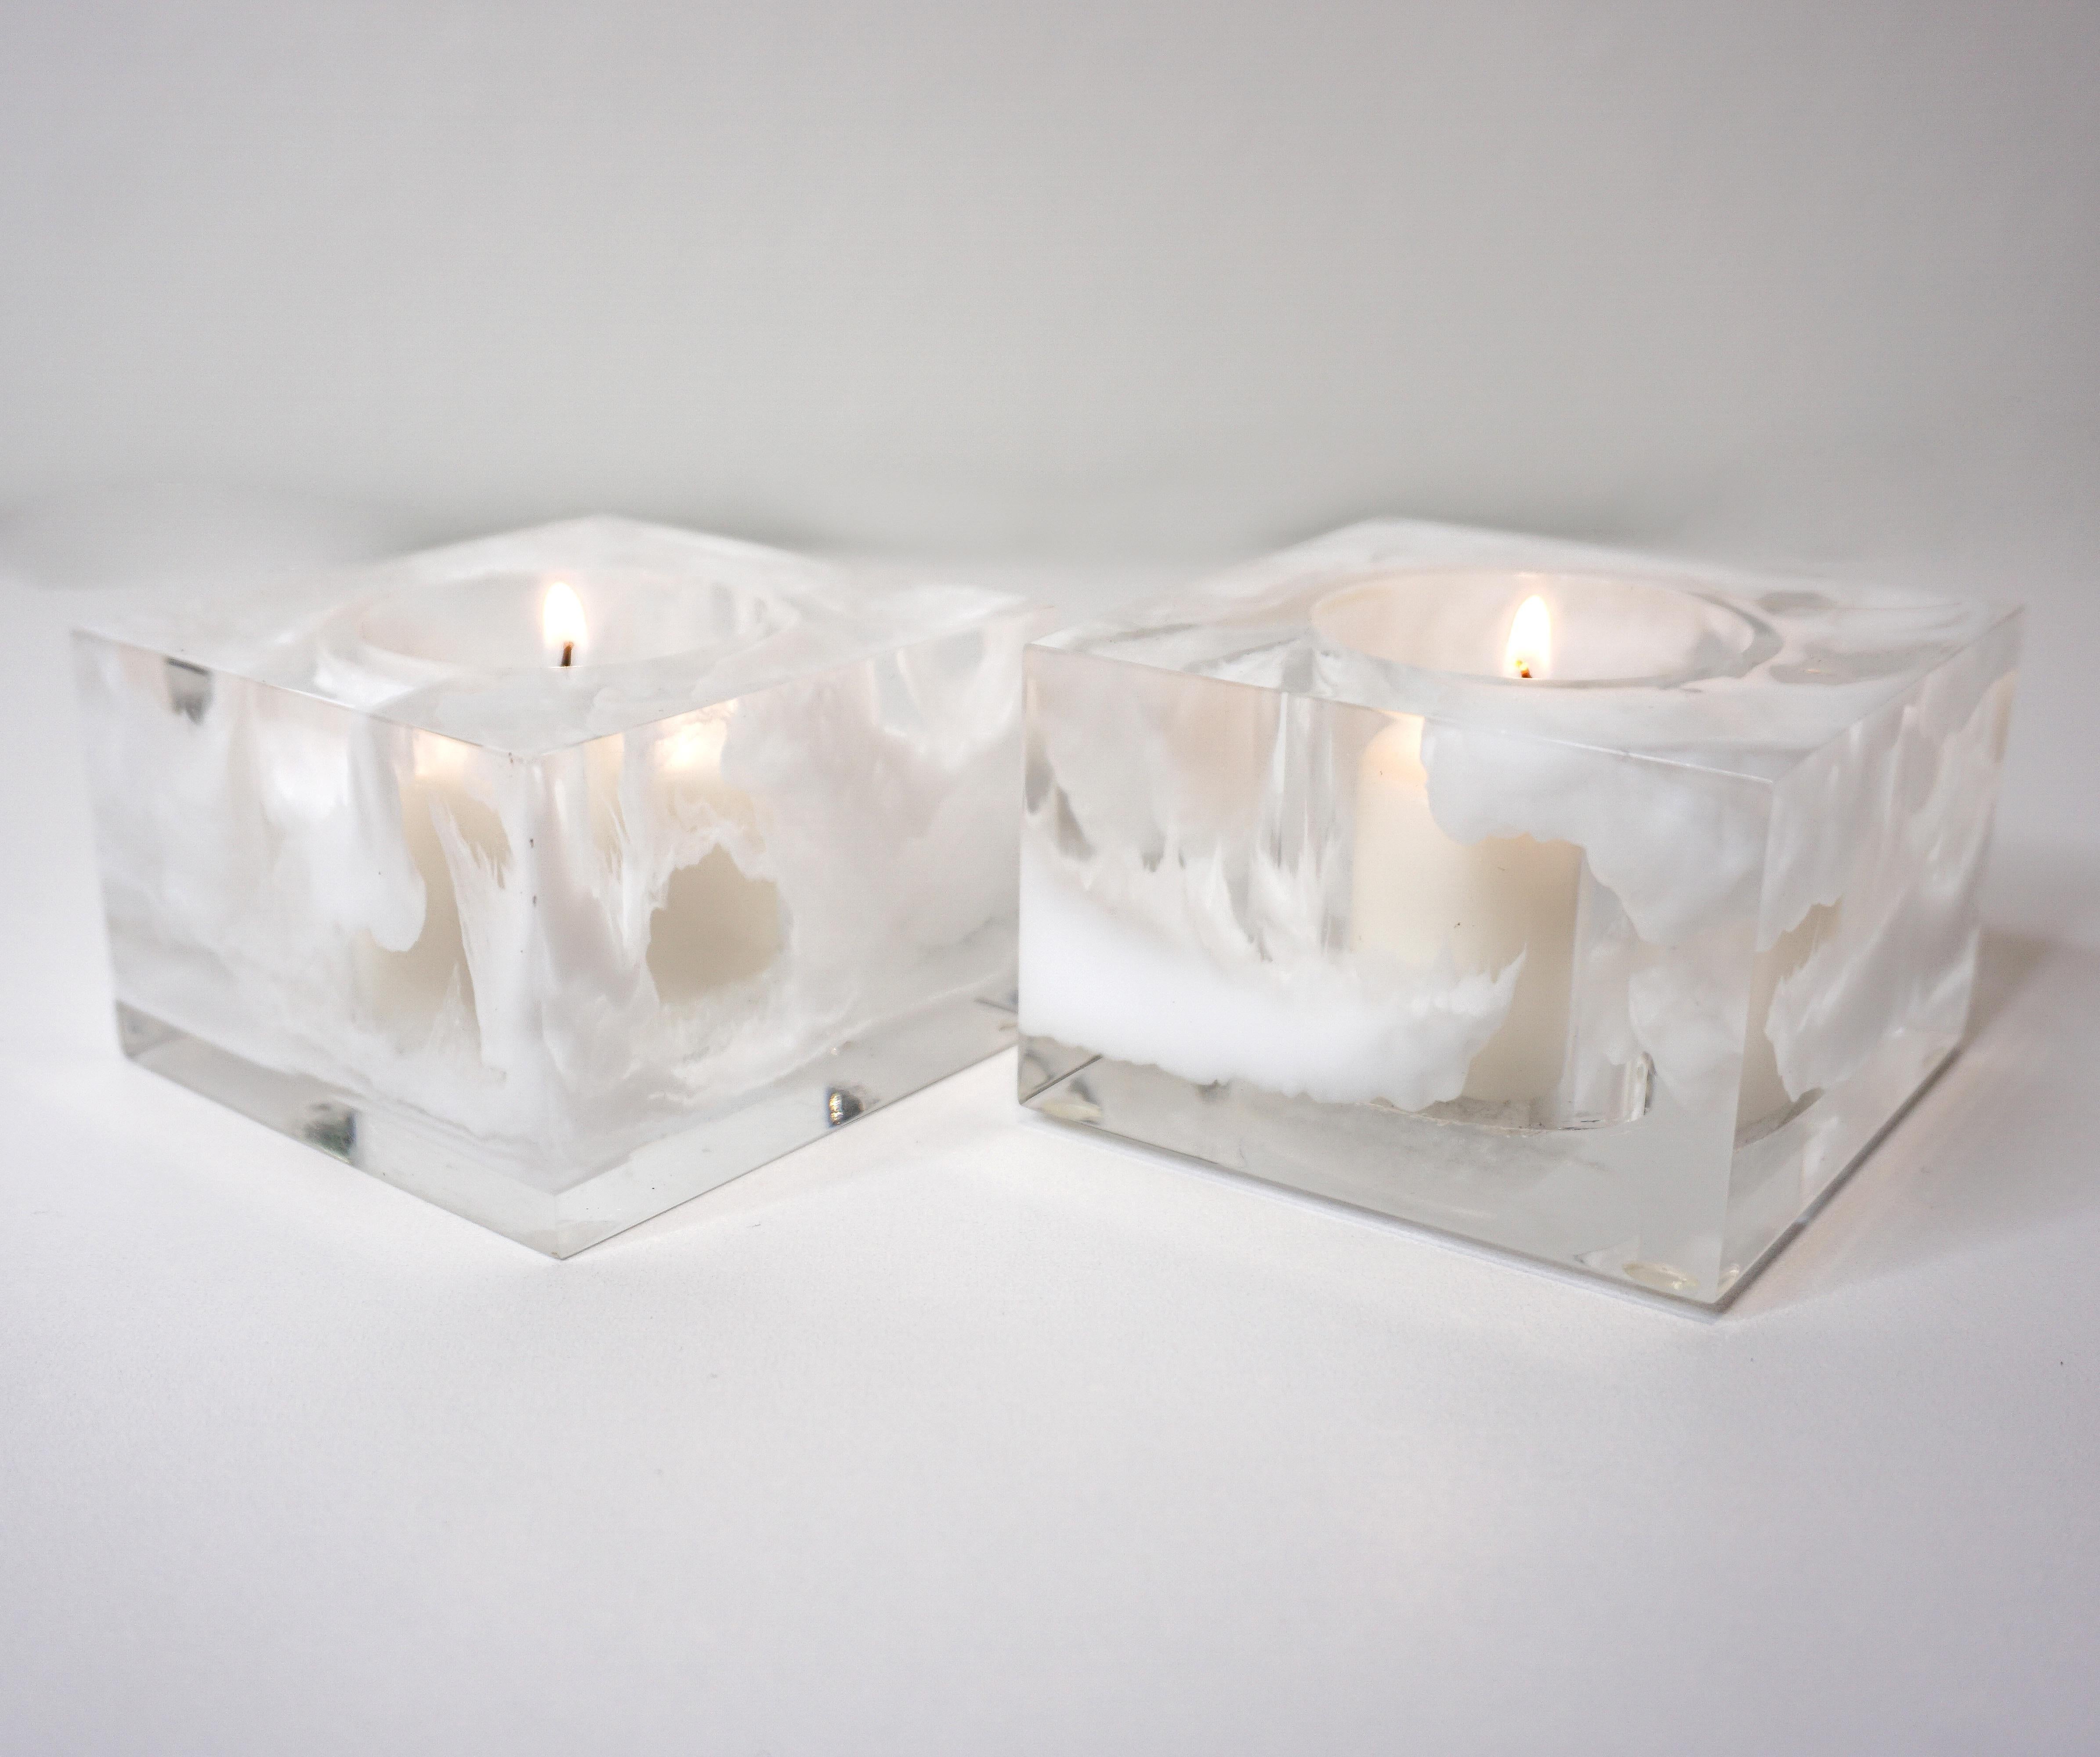 White and Lucite Votives In Excellent Condition For Sale In Dallas, TX